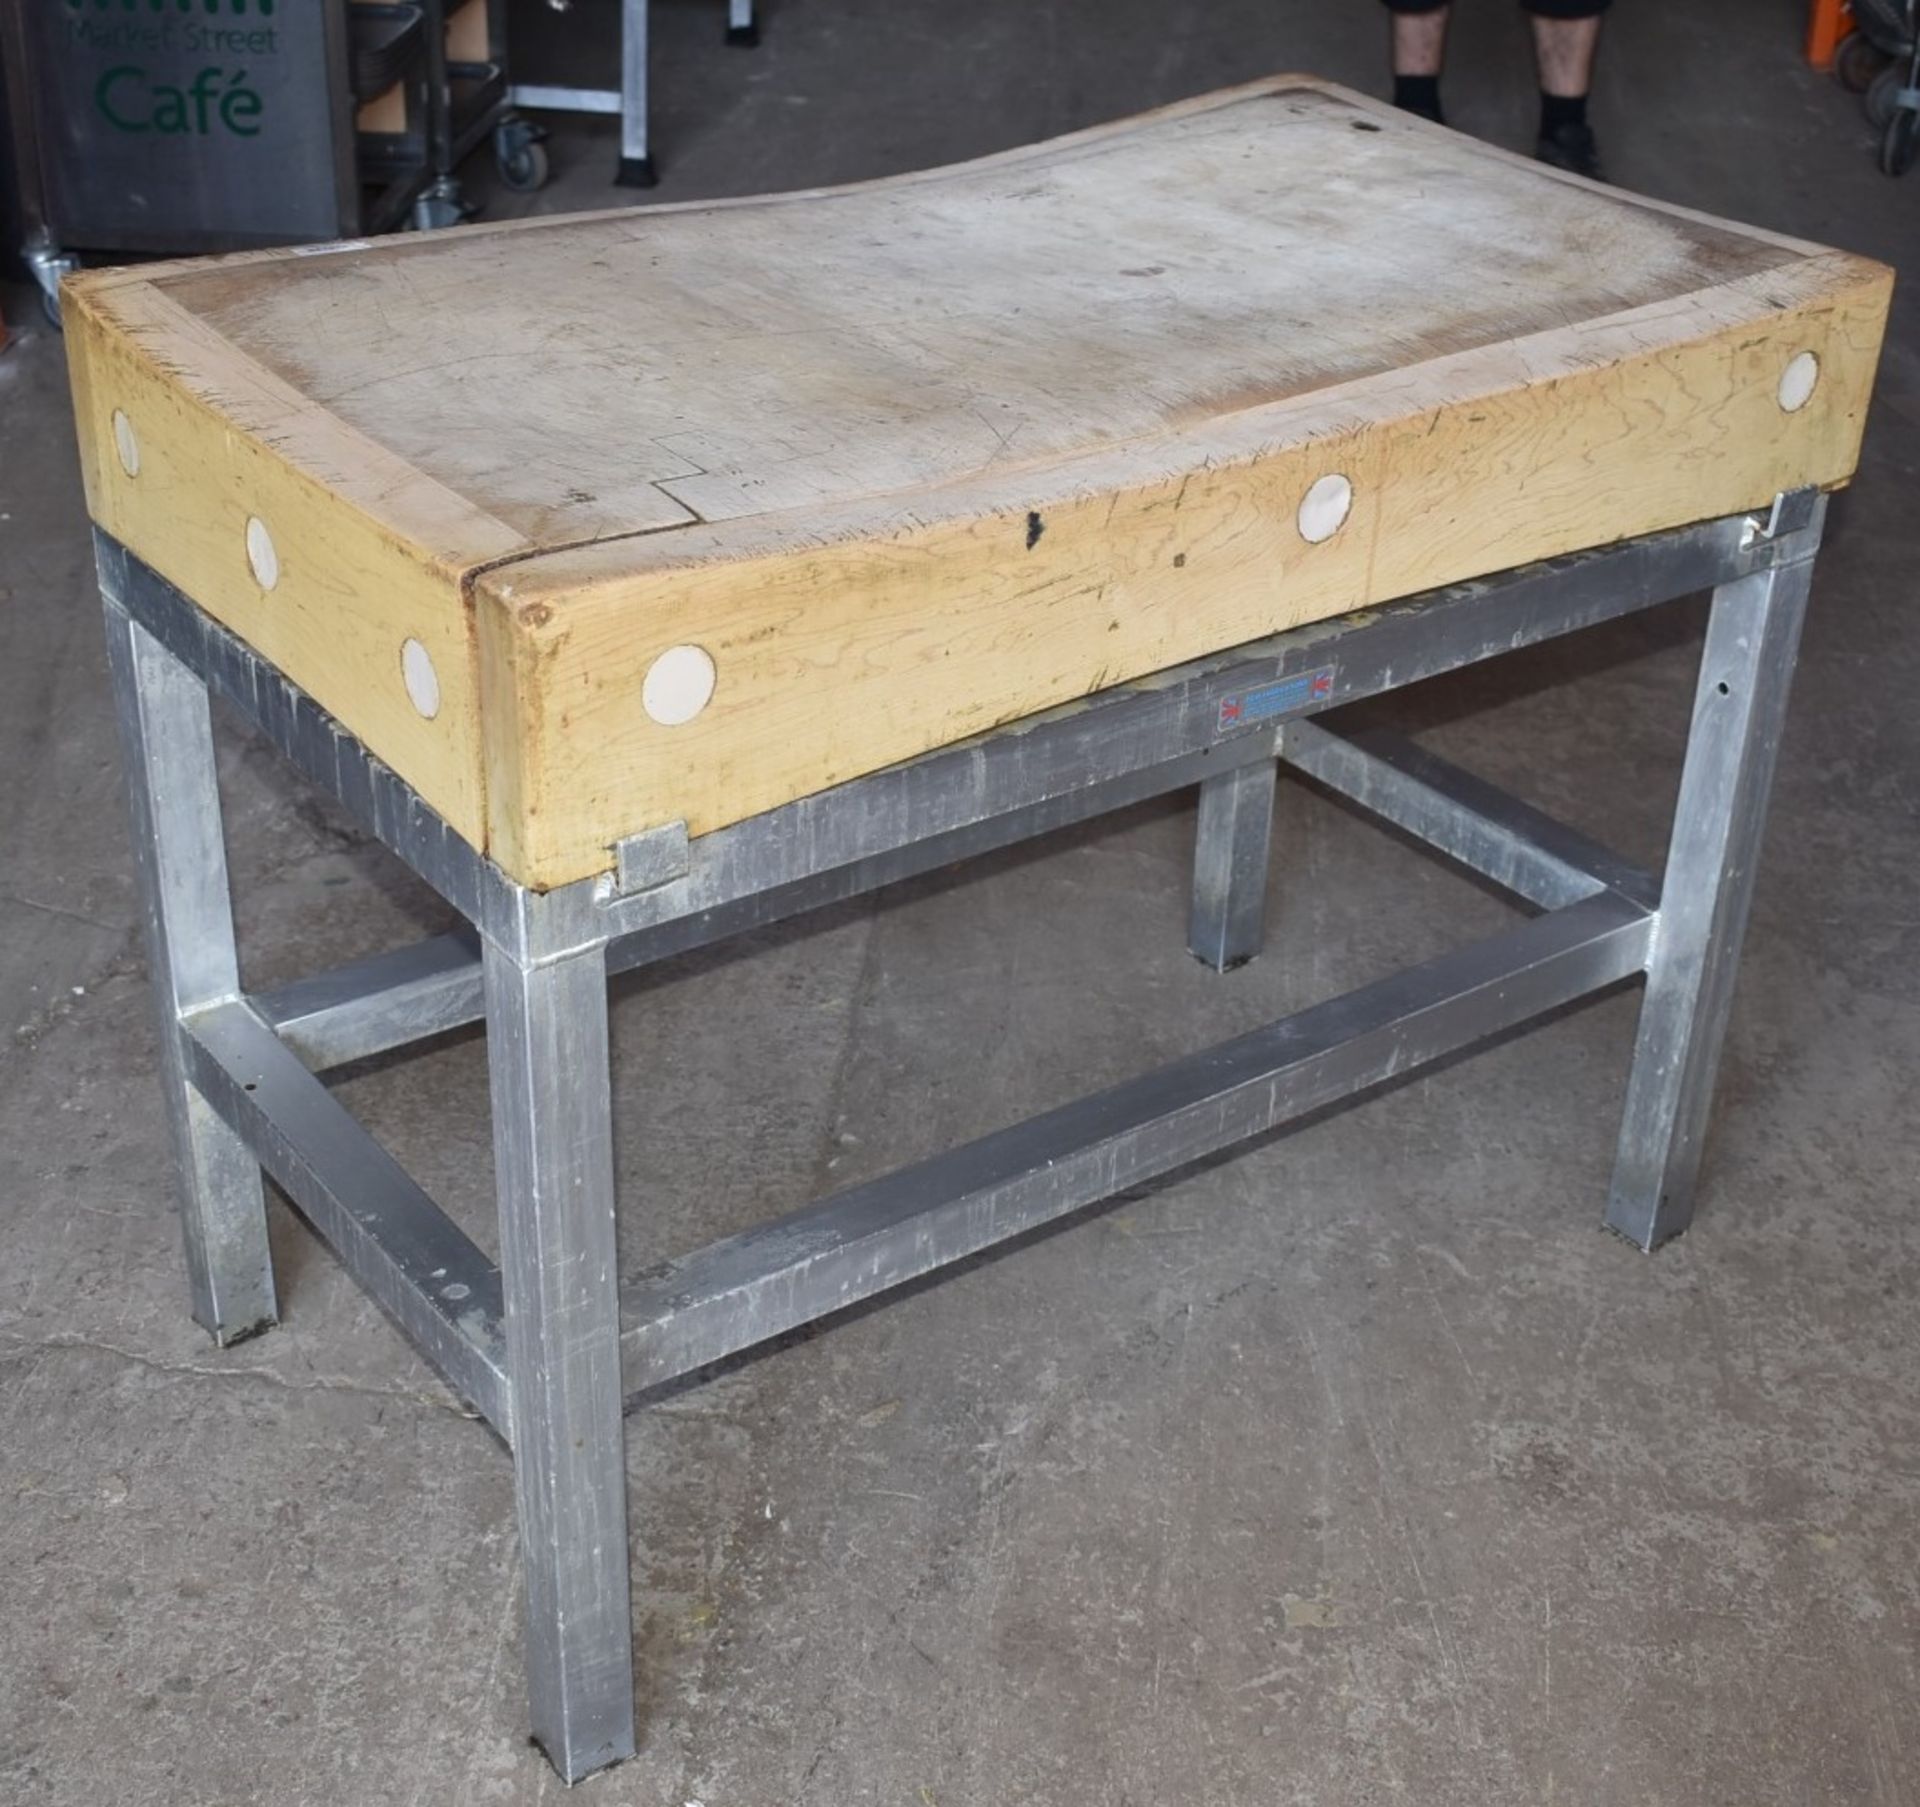 1 x Large Butchers Block Chopping Board on Fabricated Stainless Steel Stand Dimensions: H82 x W107 x